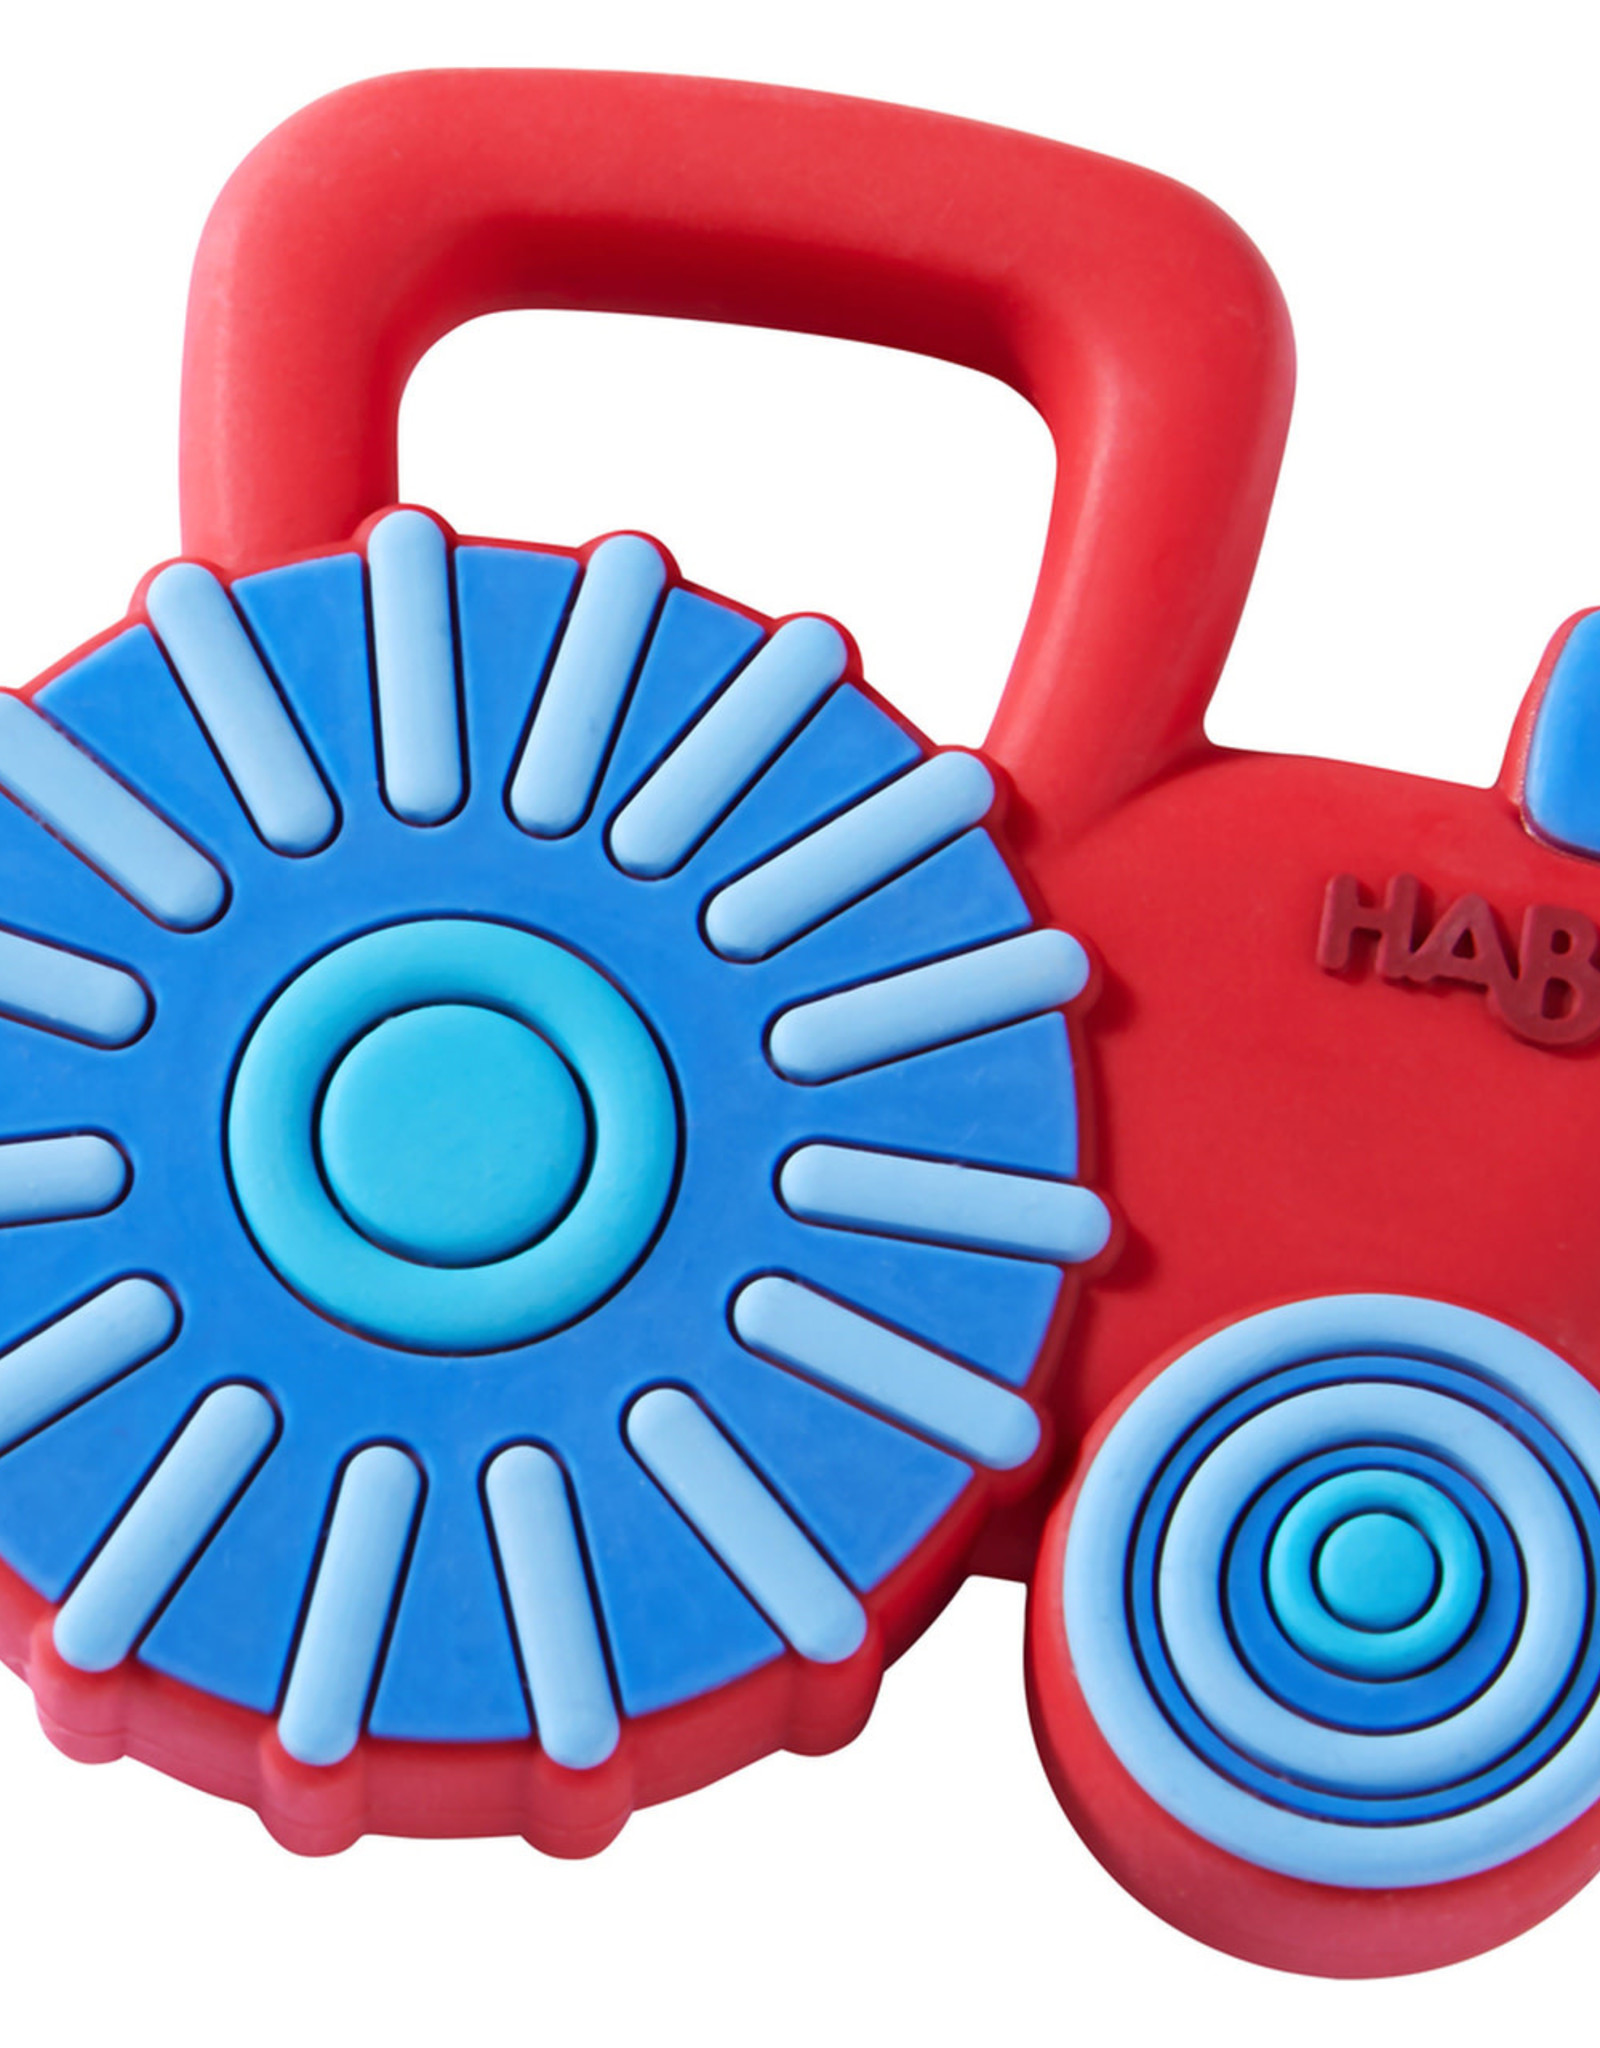 Haba Clutch Toy Tractor